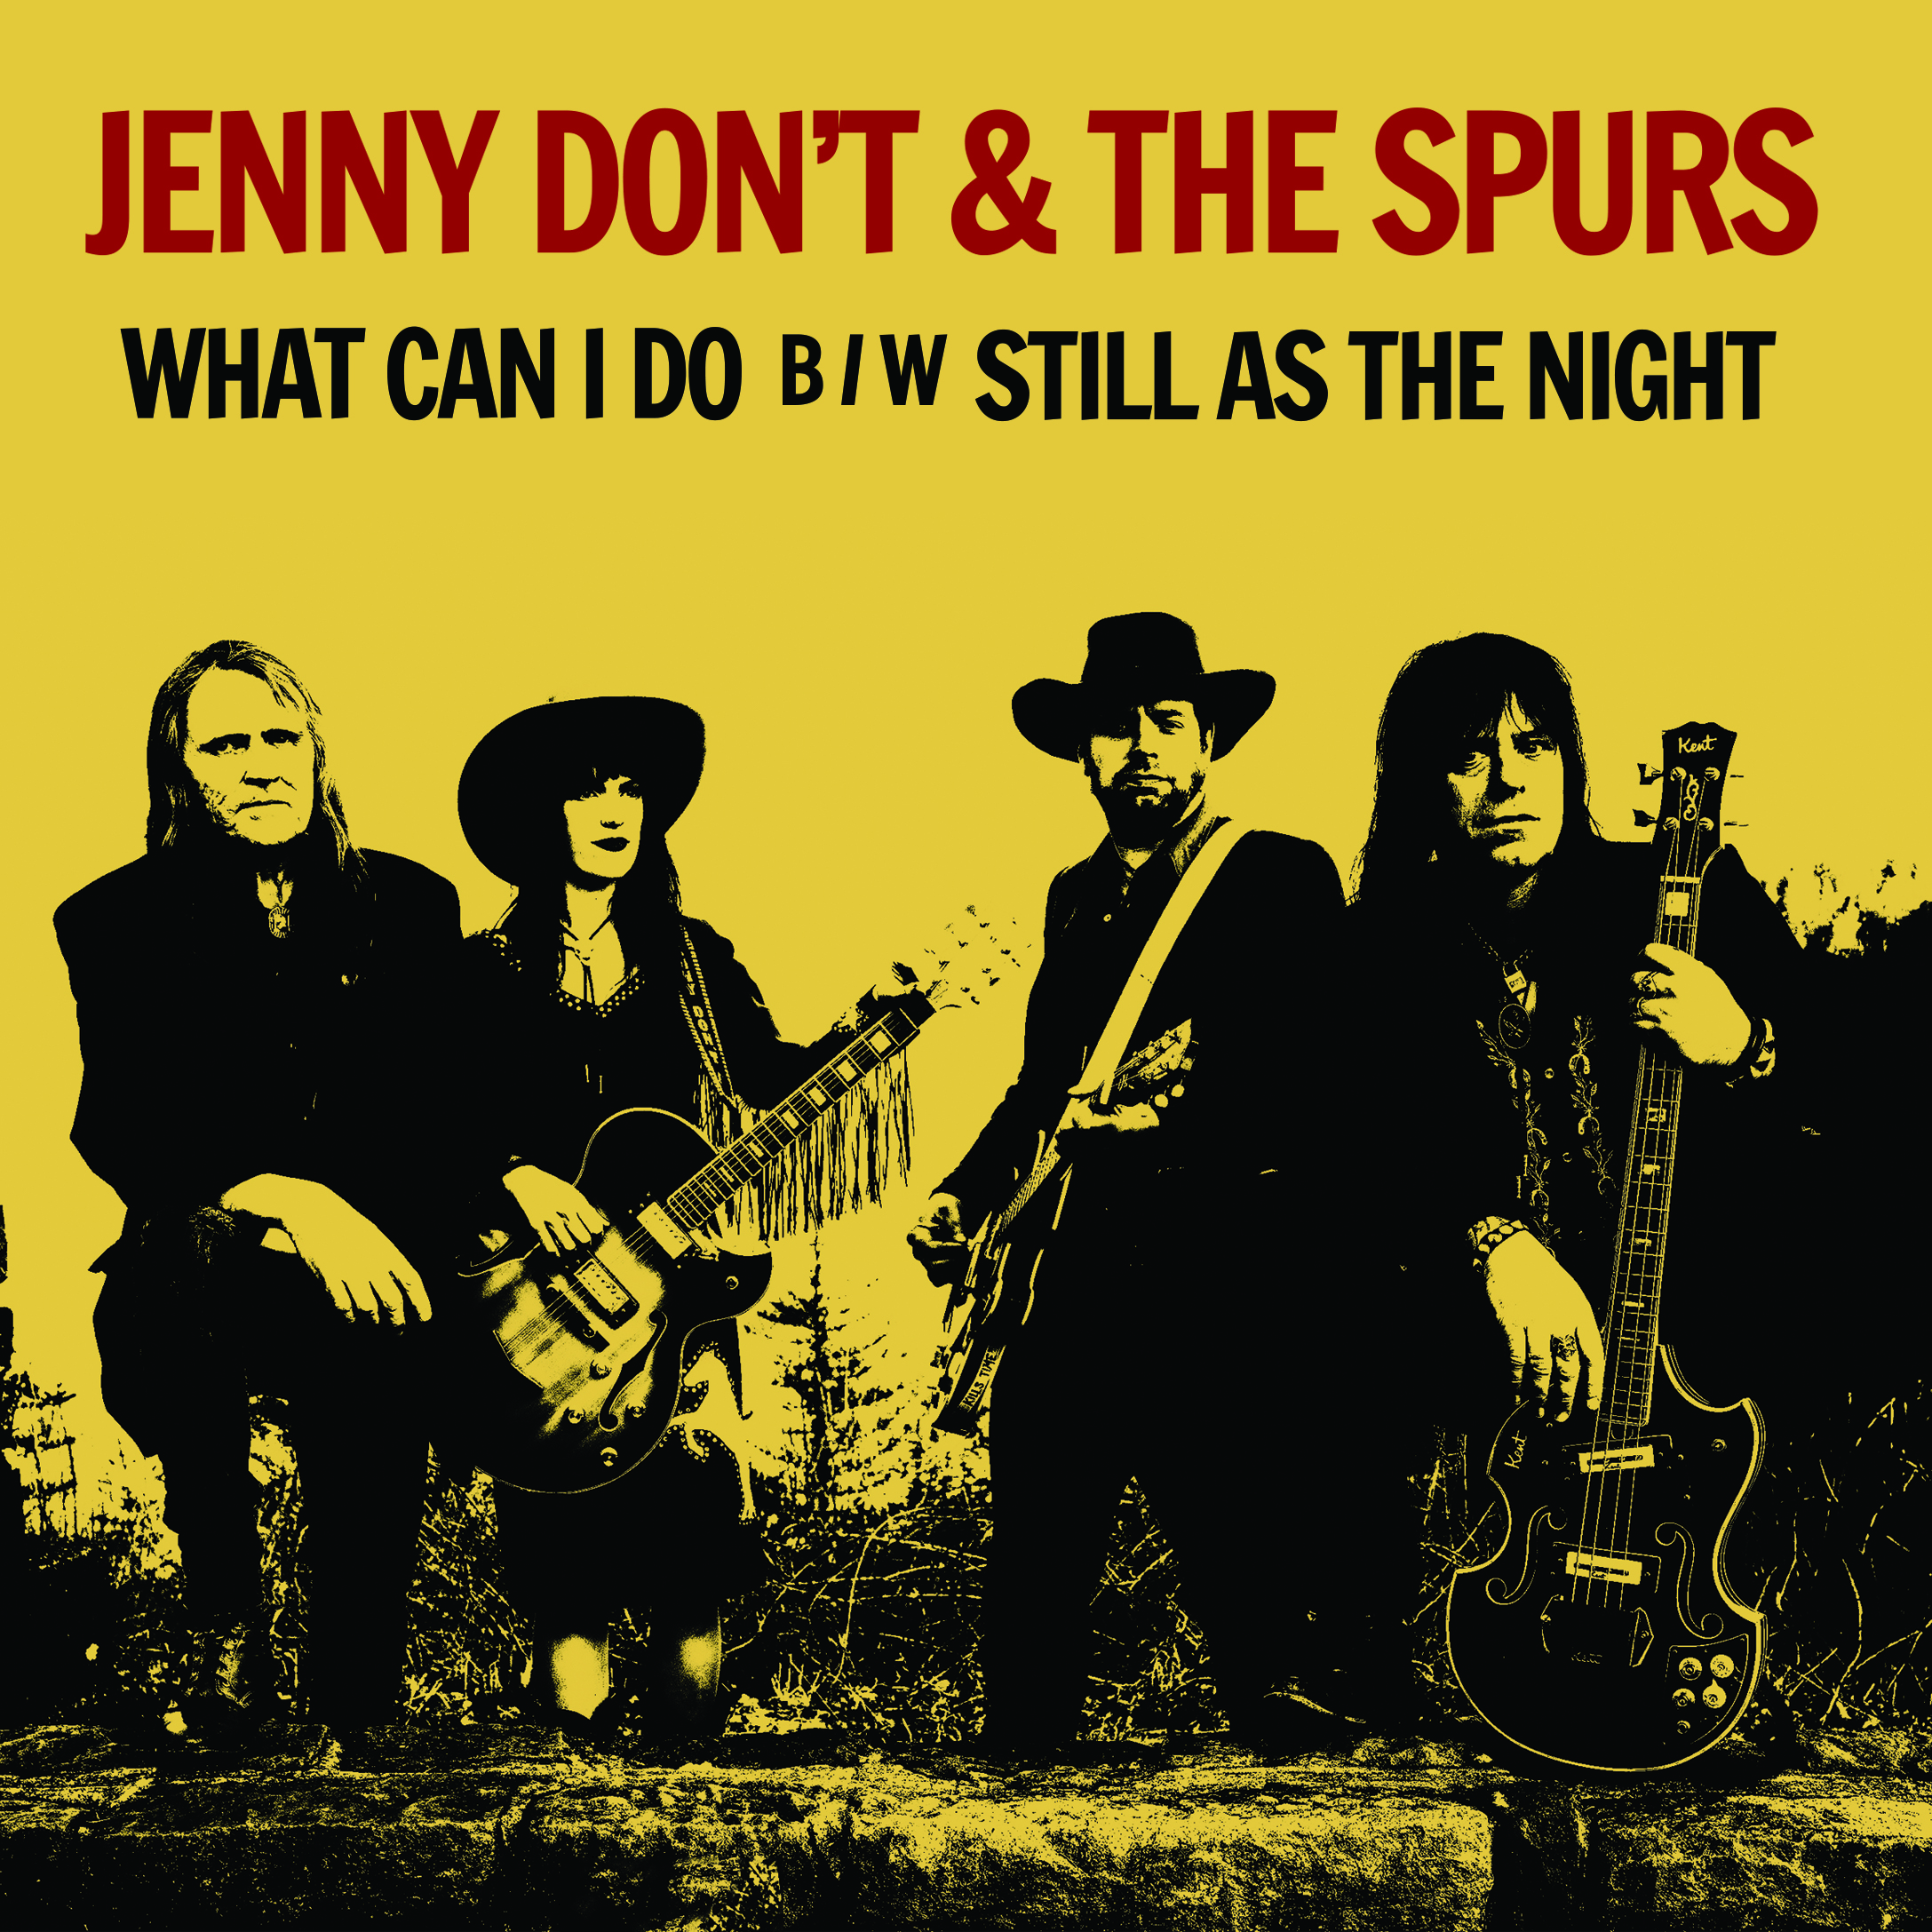 Jenny Don't & The Spurs- What Can I Do B/w Still As The Night 7" [LIMITED BLACK VINYL]